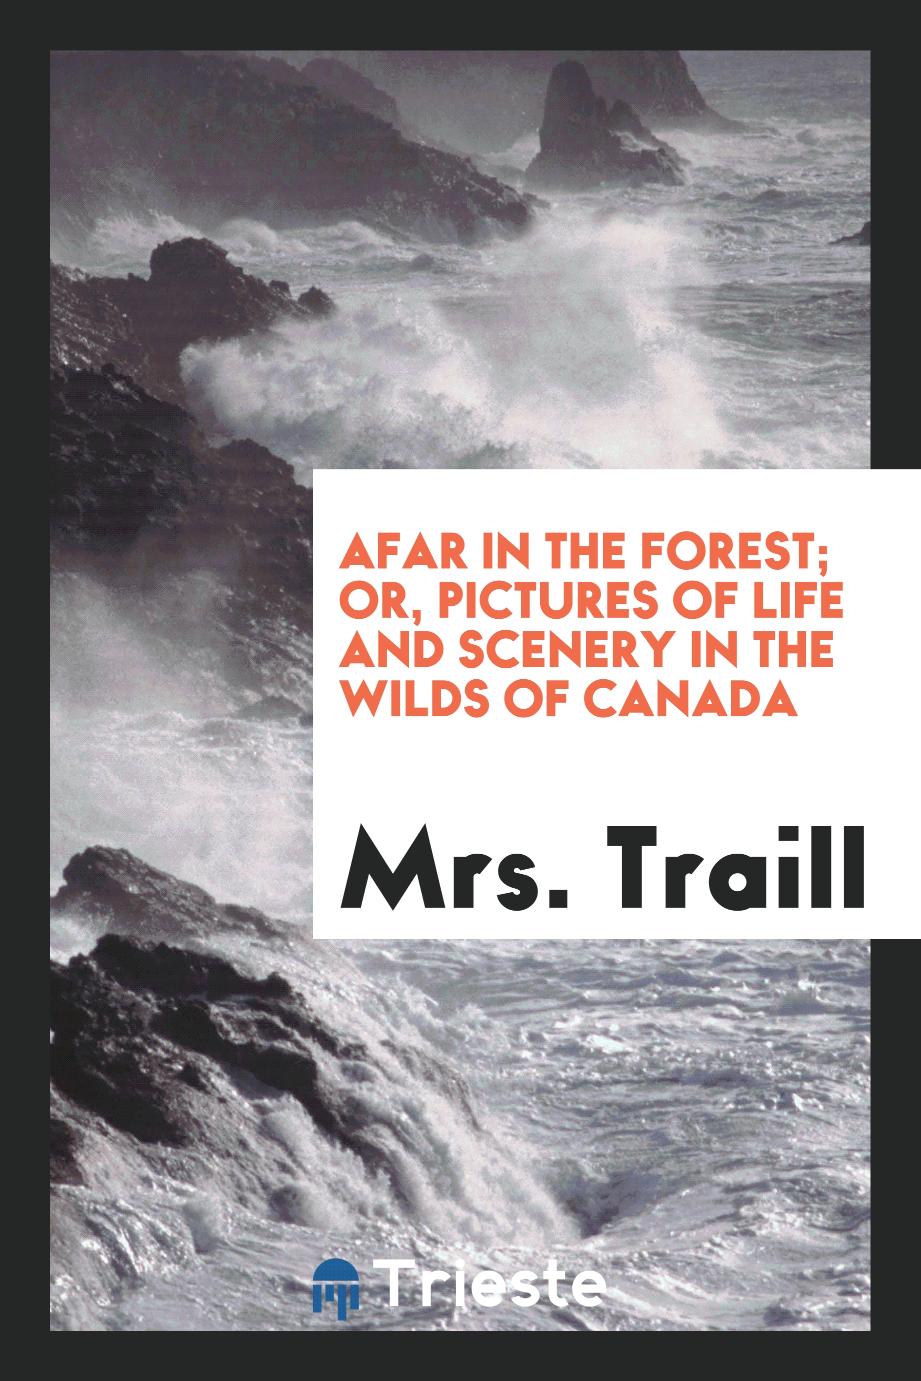 Afar in the forest; or, Pictures of life and scenery in the wilds of Canada